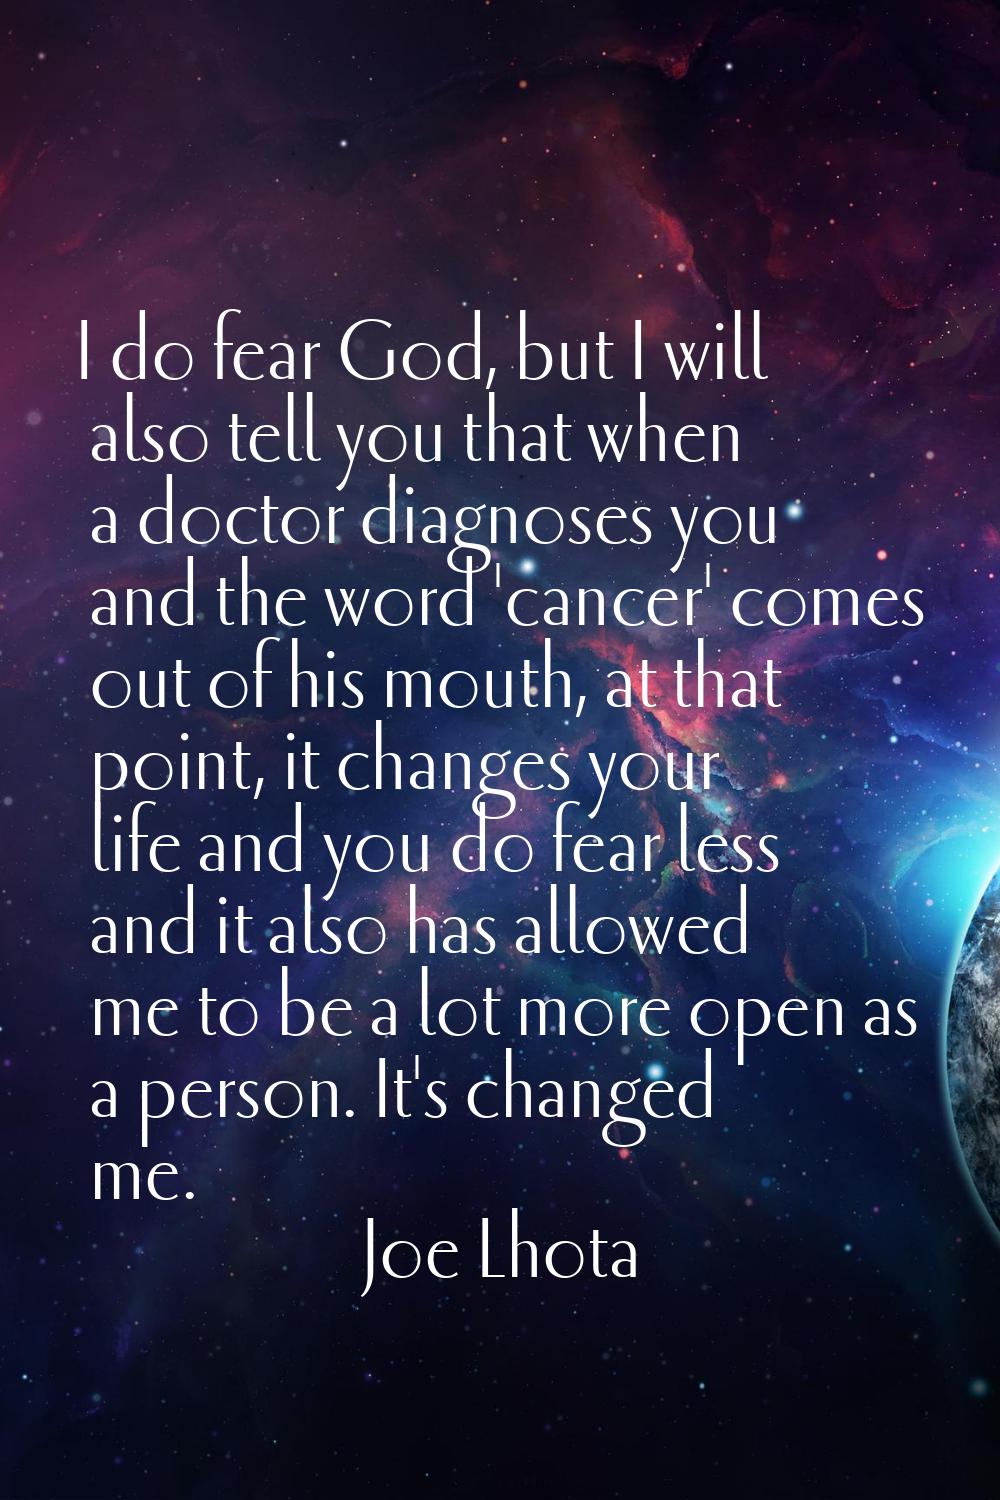 I do fear God, but I will also tell you that when a doctor diagnoses you and the word 'cancer' come